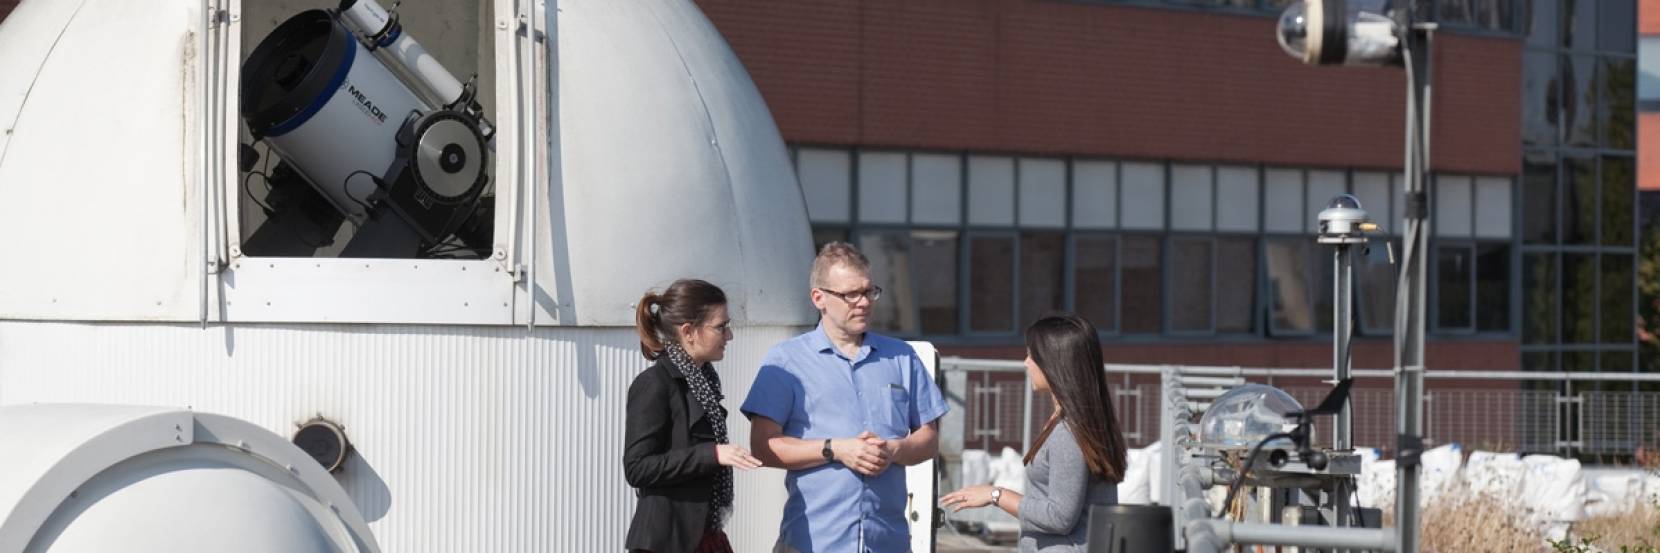 Students with the University of Sheffield's rooftop telescopes